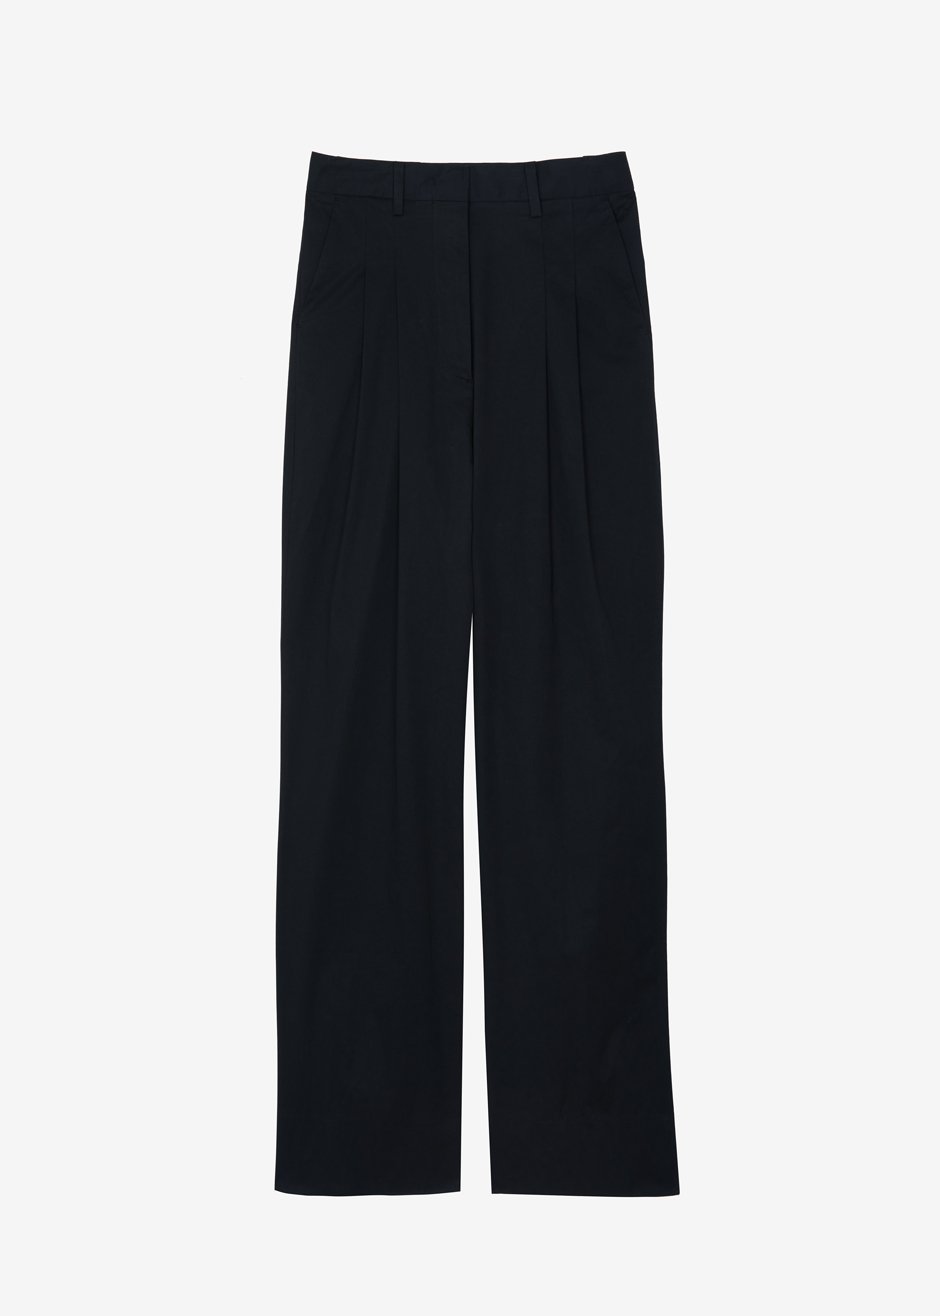 Blanche Pleated Trousers - Black - 10